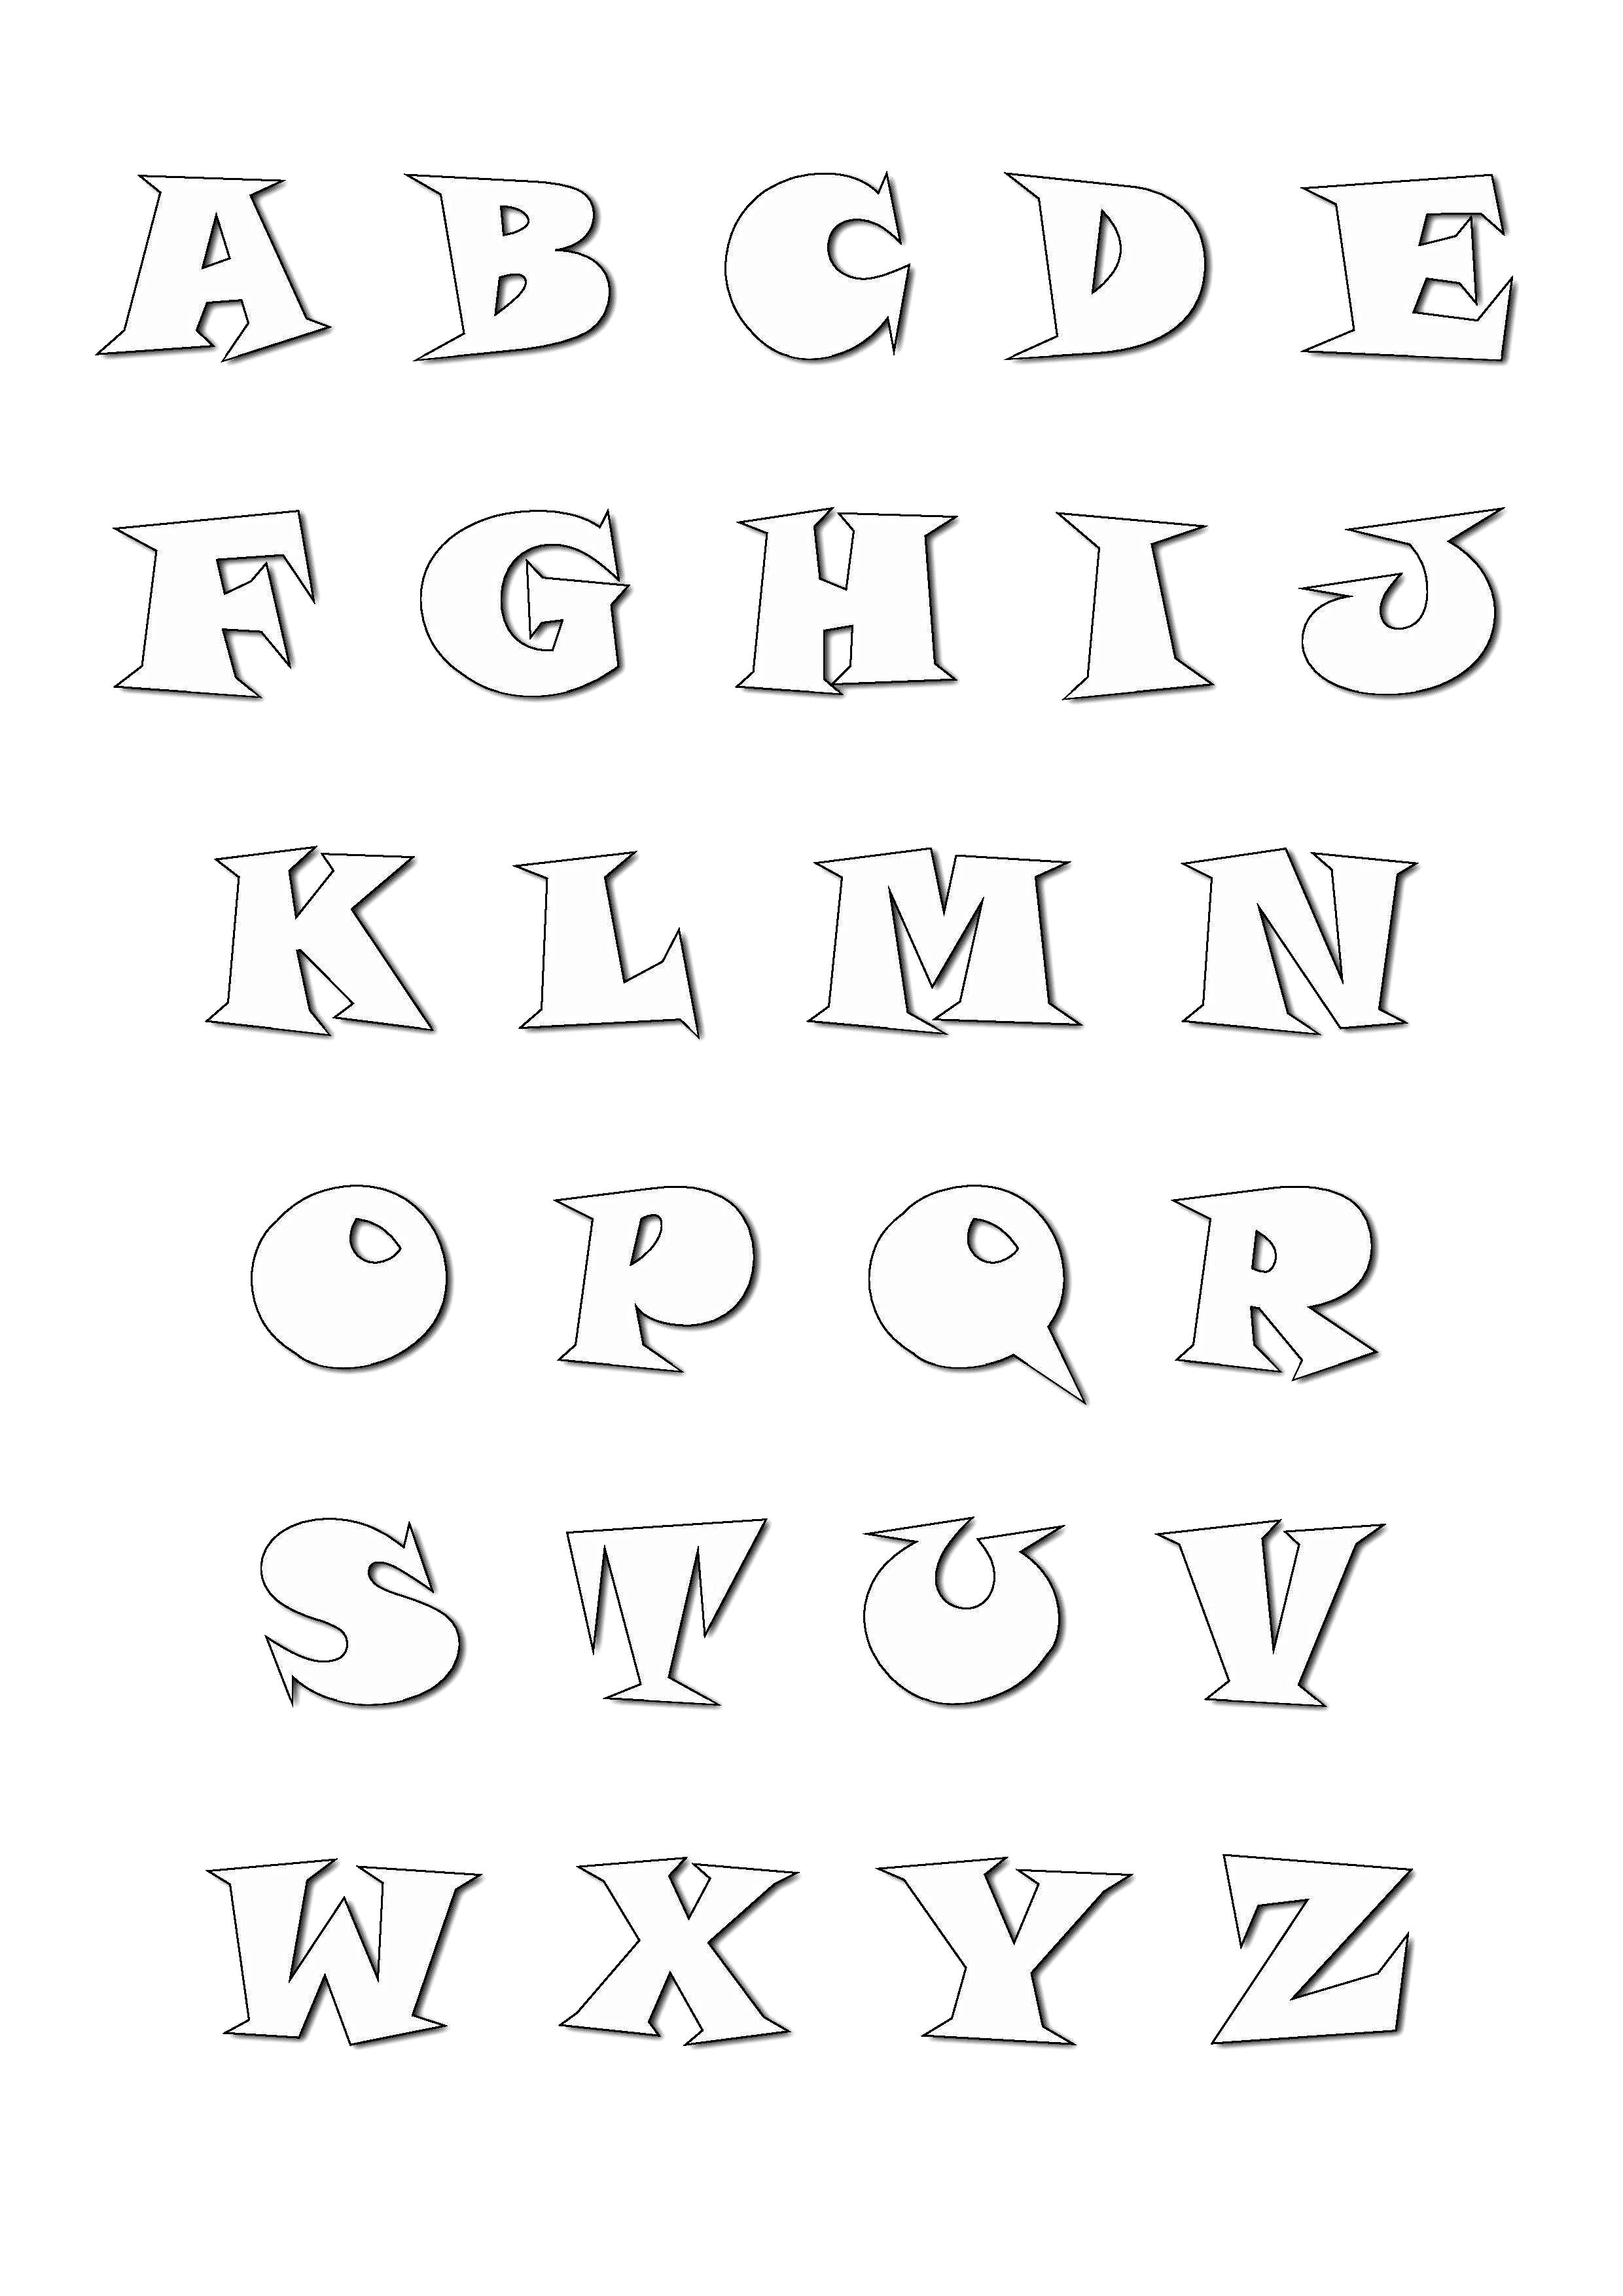 alphabet-coloring-pages-we-designed-a-wide-variety-of-alphabet